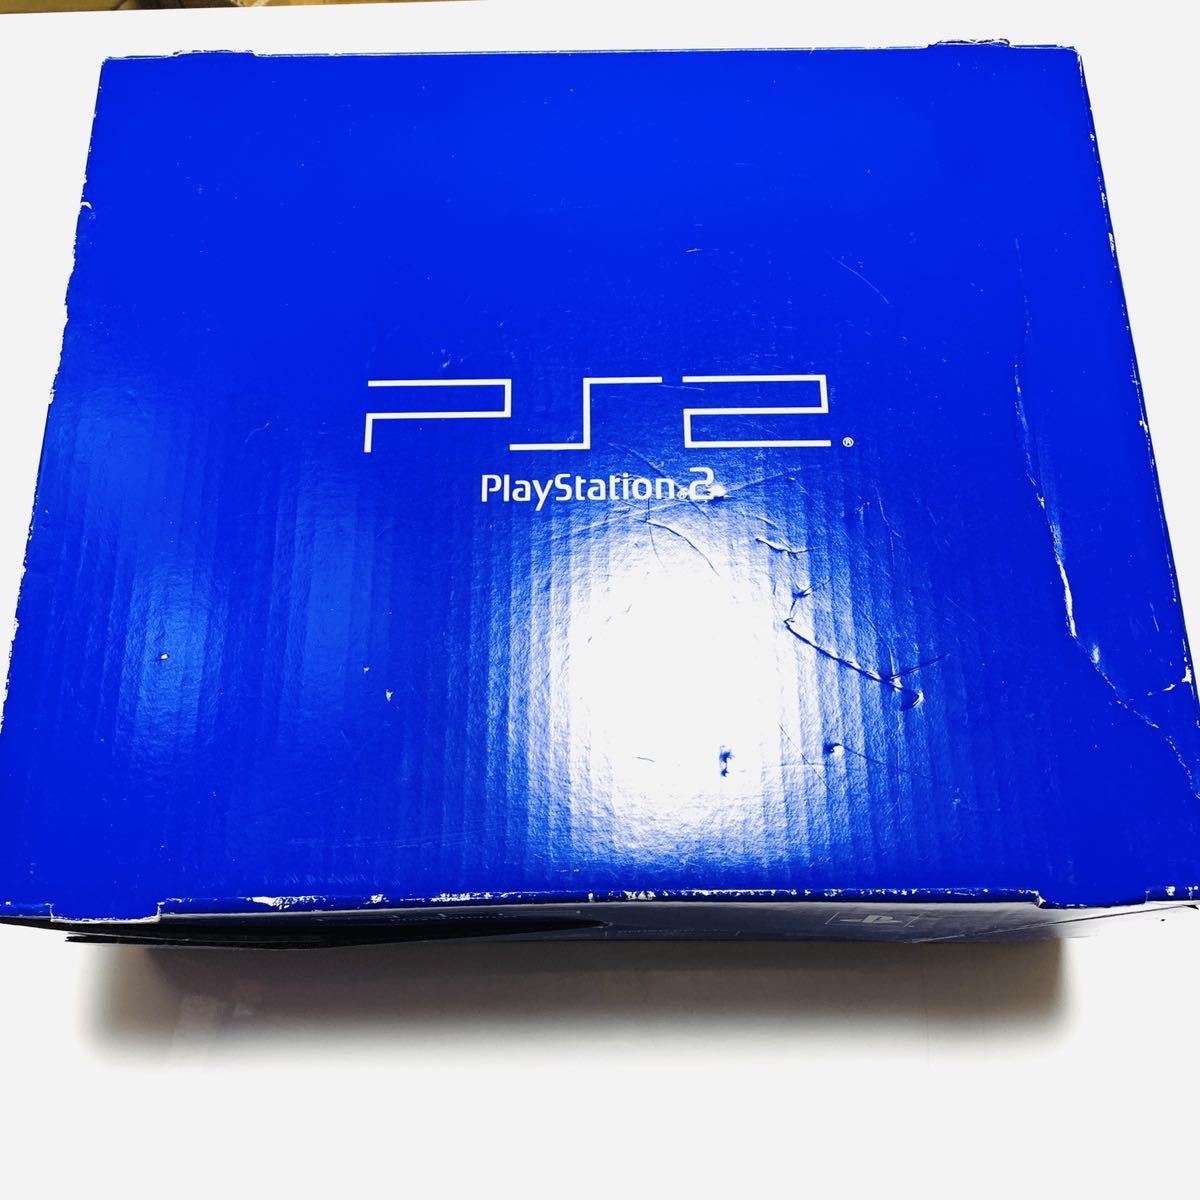 PlayStation2 SCPH-15000 すぐ遊べるセット